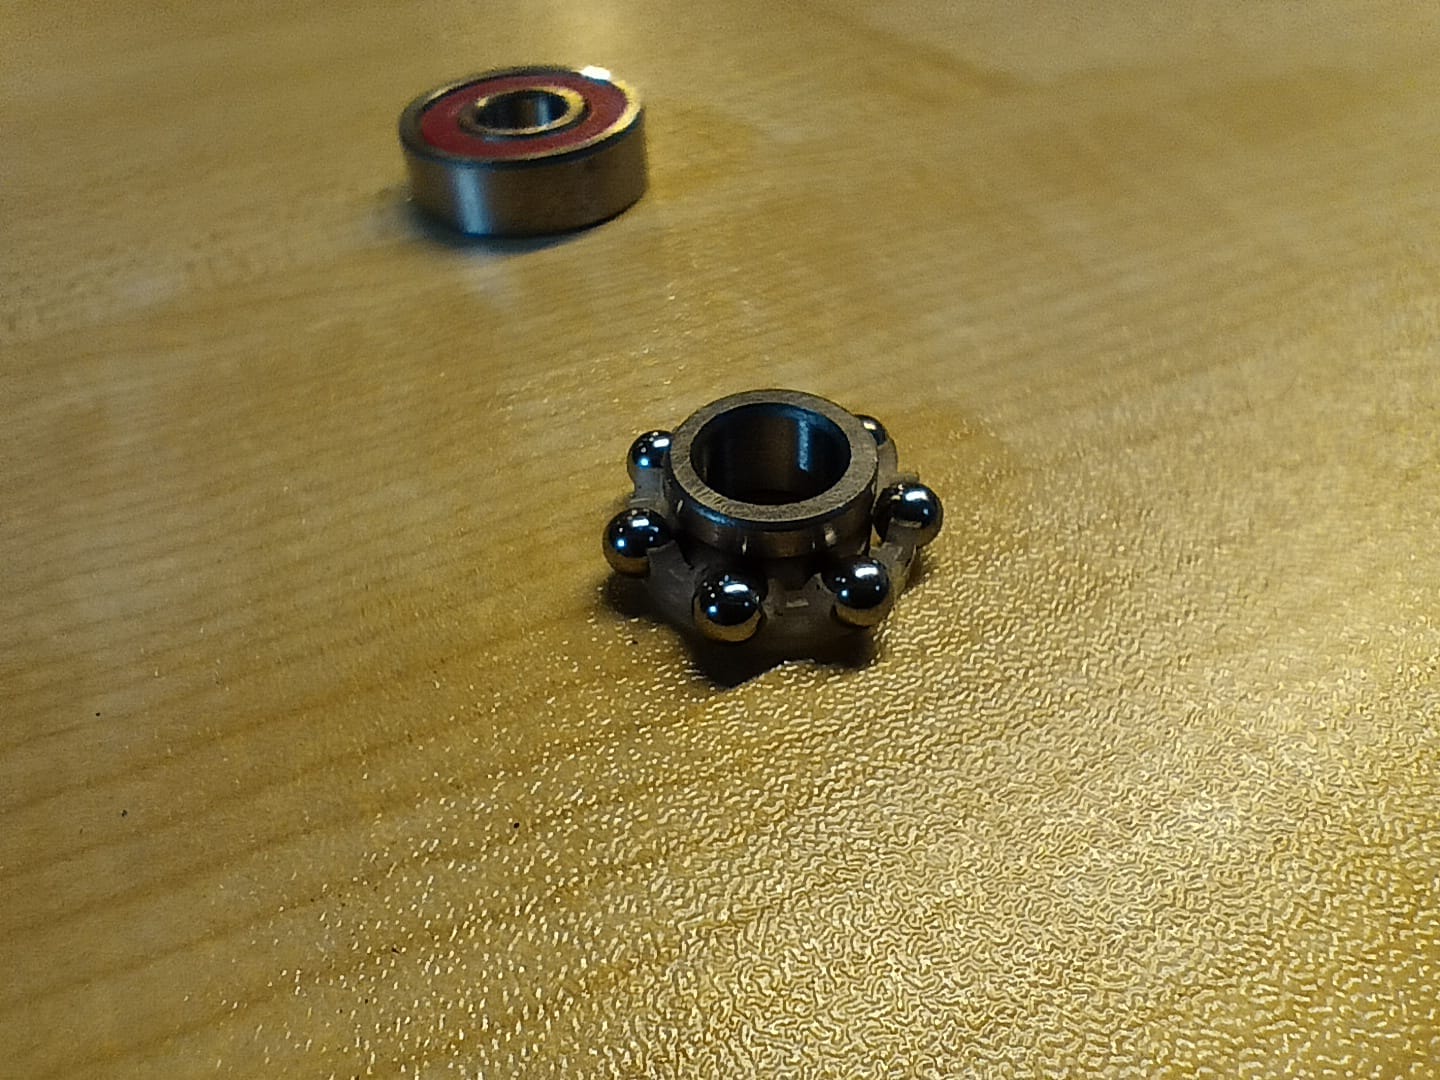 Most of the bearings are ball bearings.